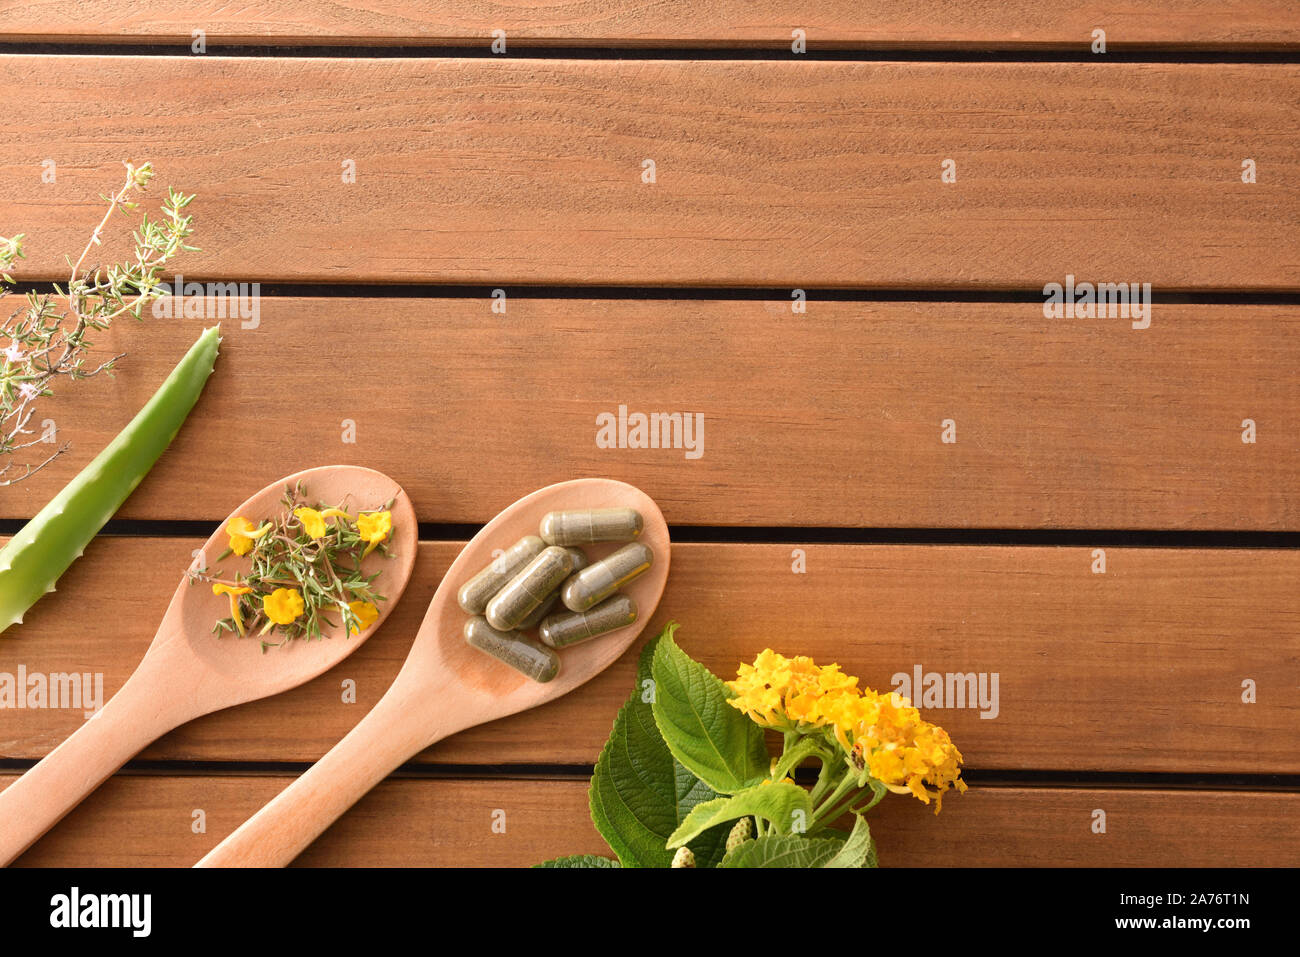 Natural medicine capsules of herbs on wood spoon on wooden table with plant. Alternative natural medicine concept. Top view. Horizontal composition. Stock Photo